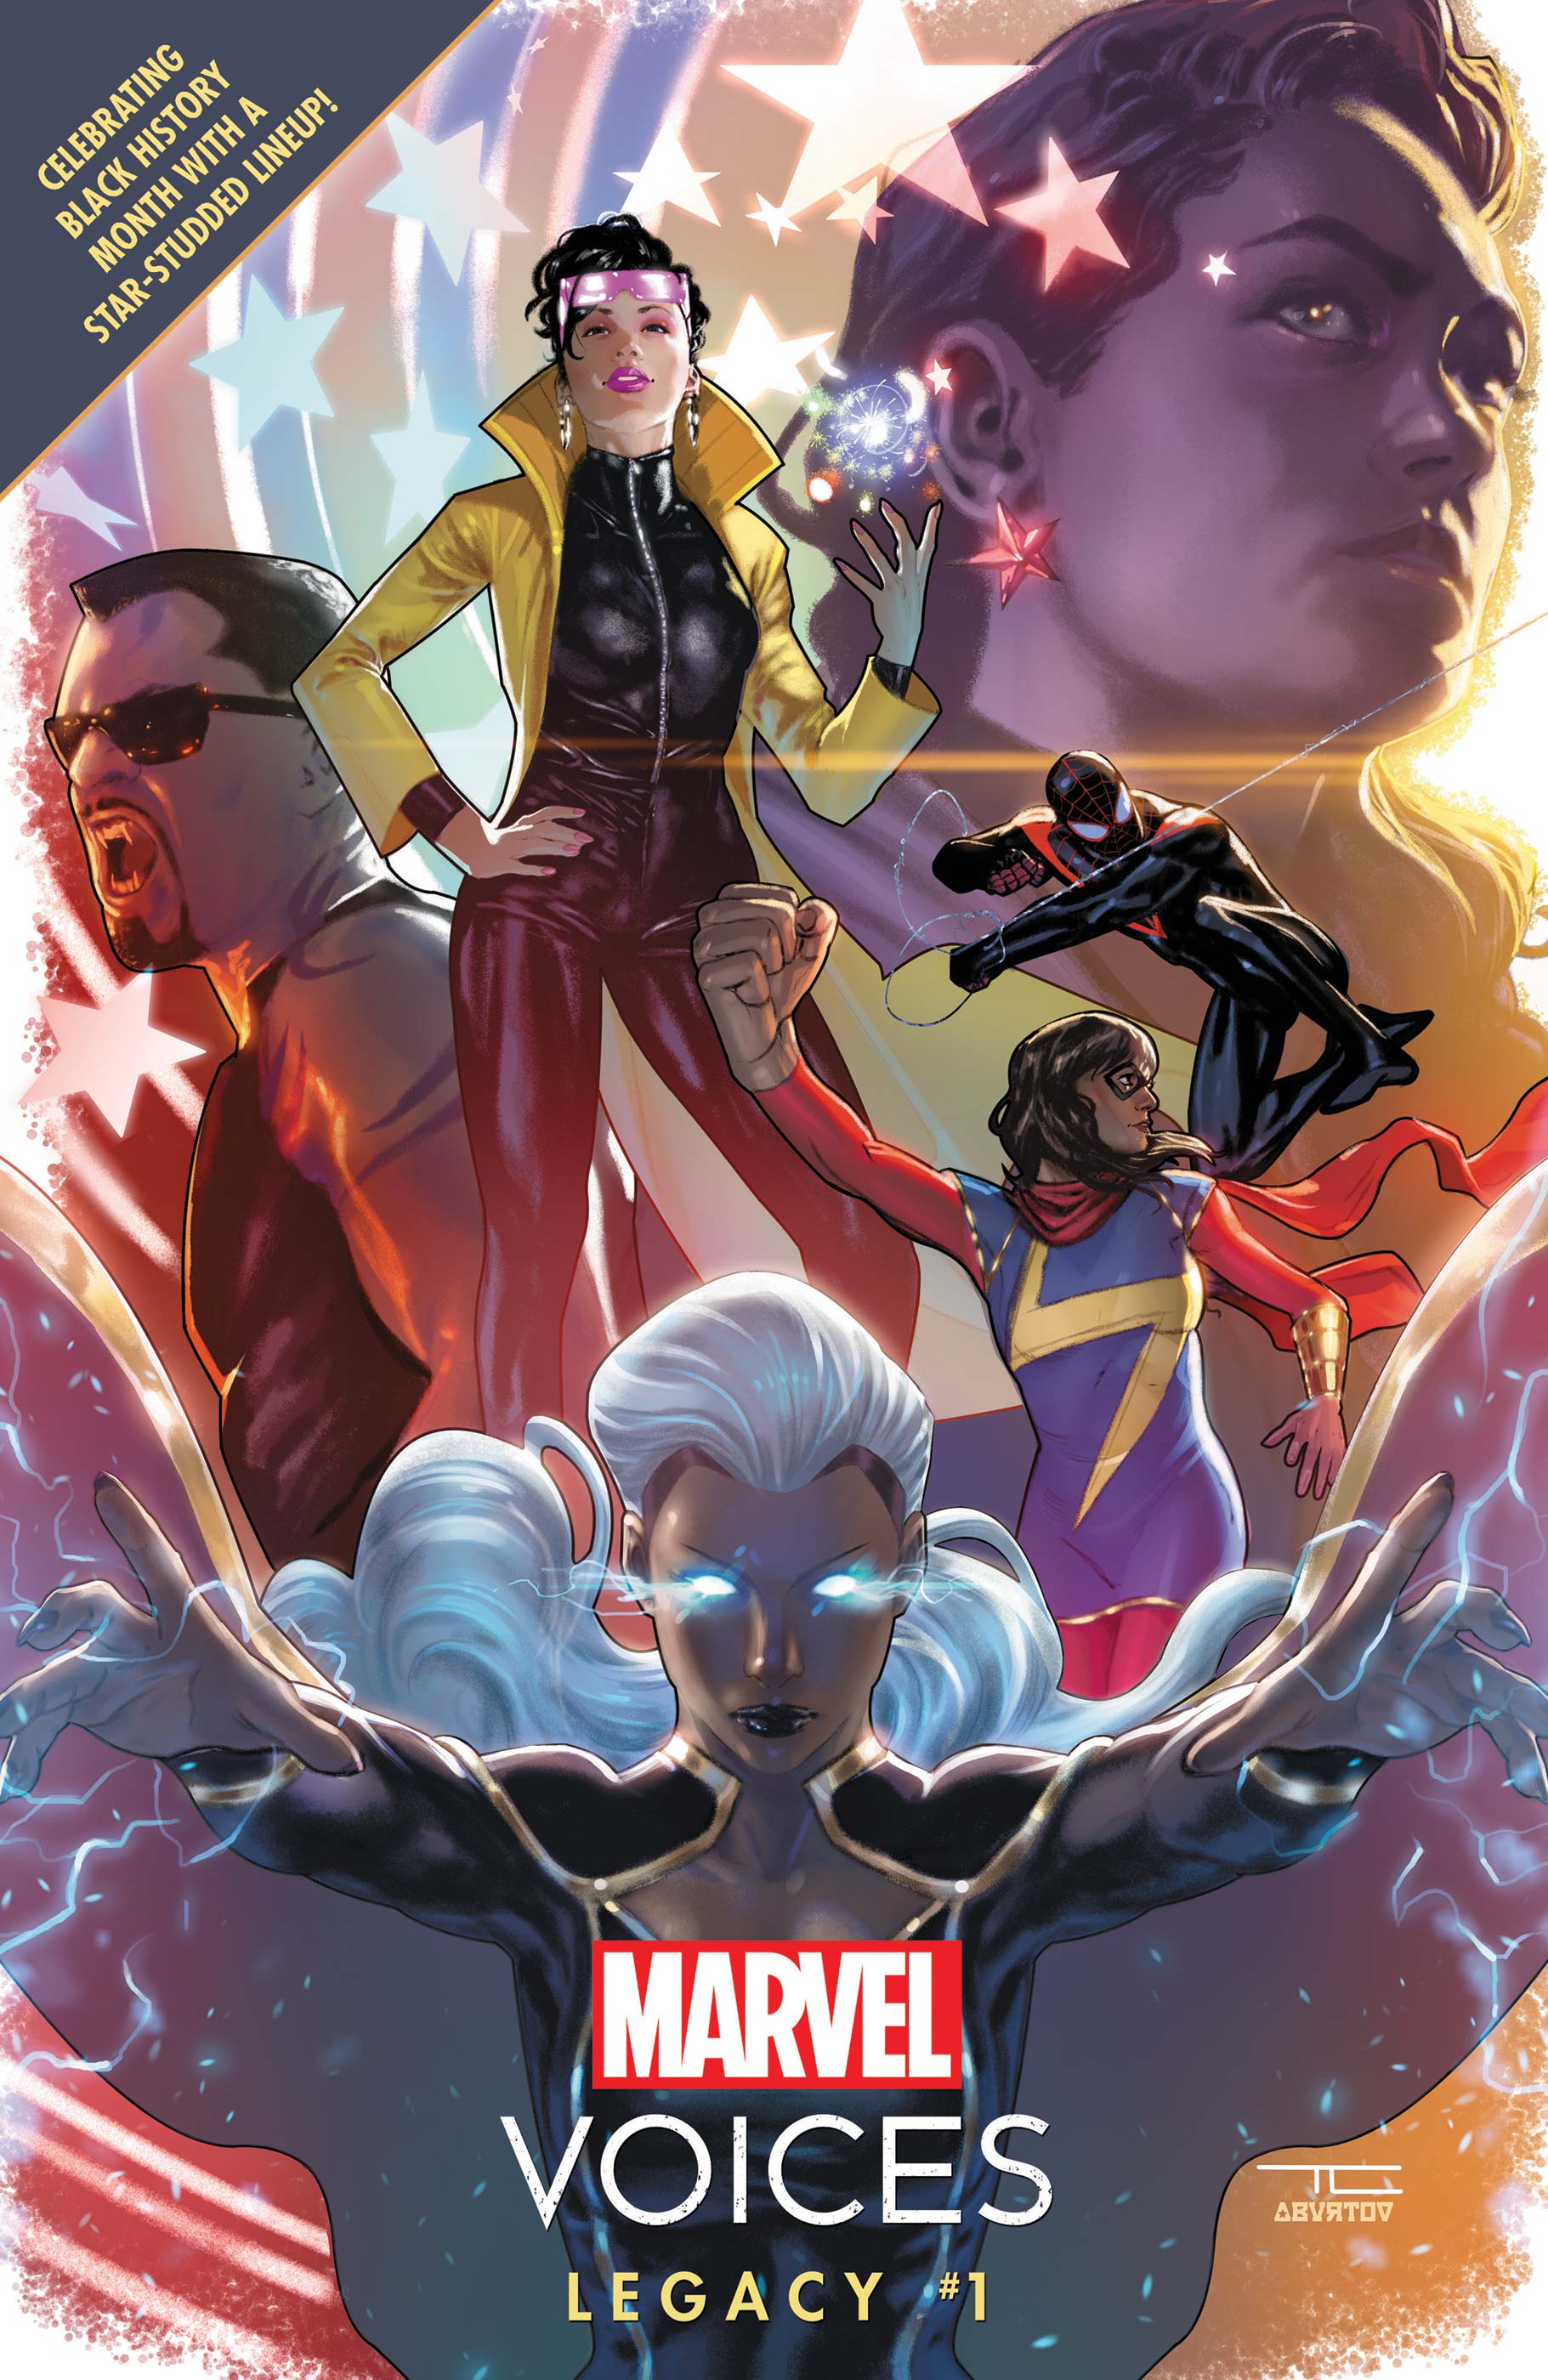 Marvel's Voices: Legacy (2021) #1